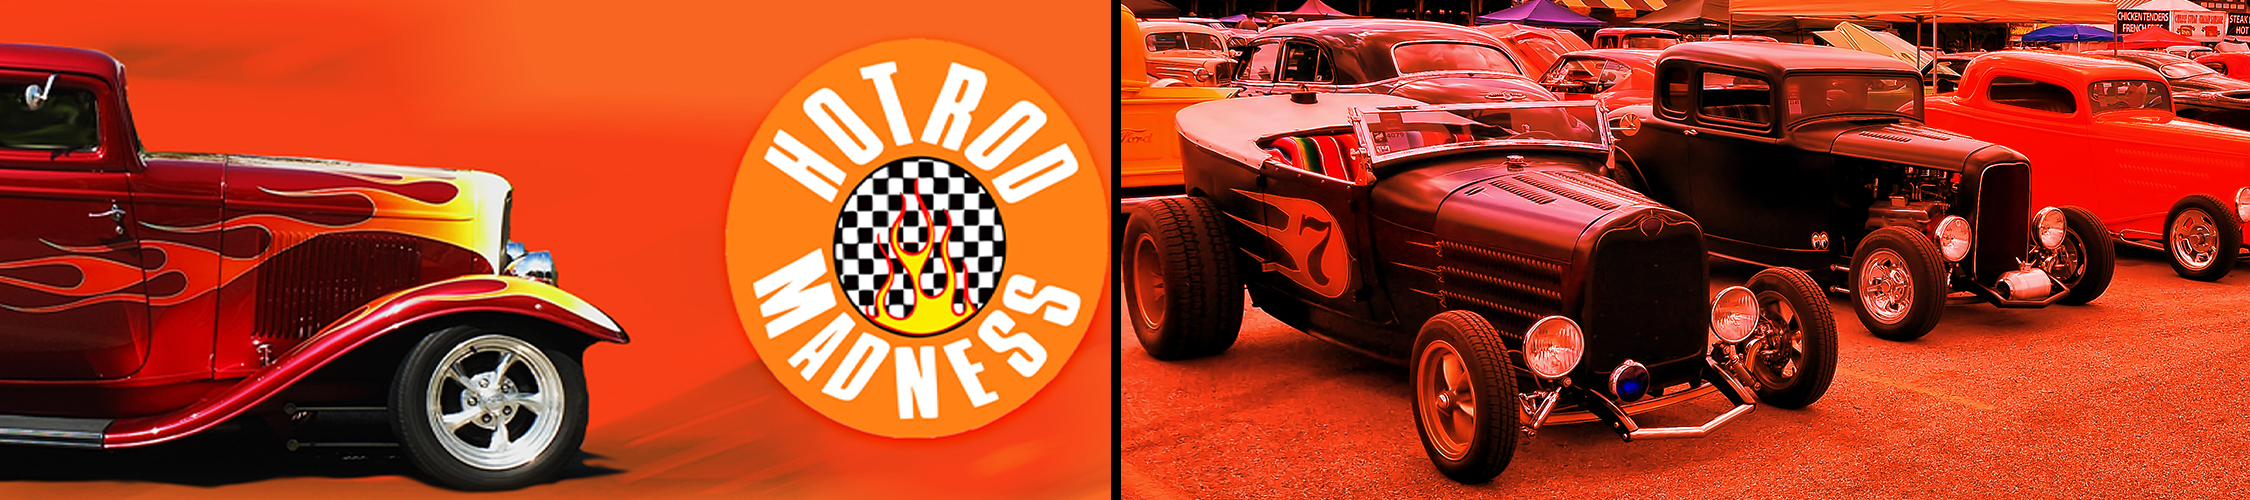 About Hot Rod Madness